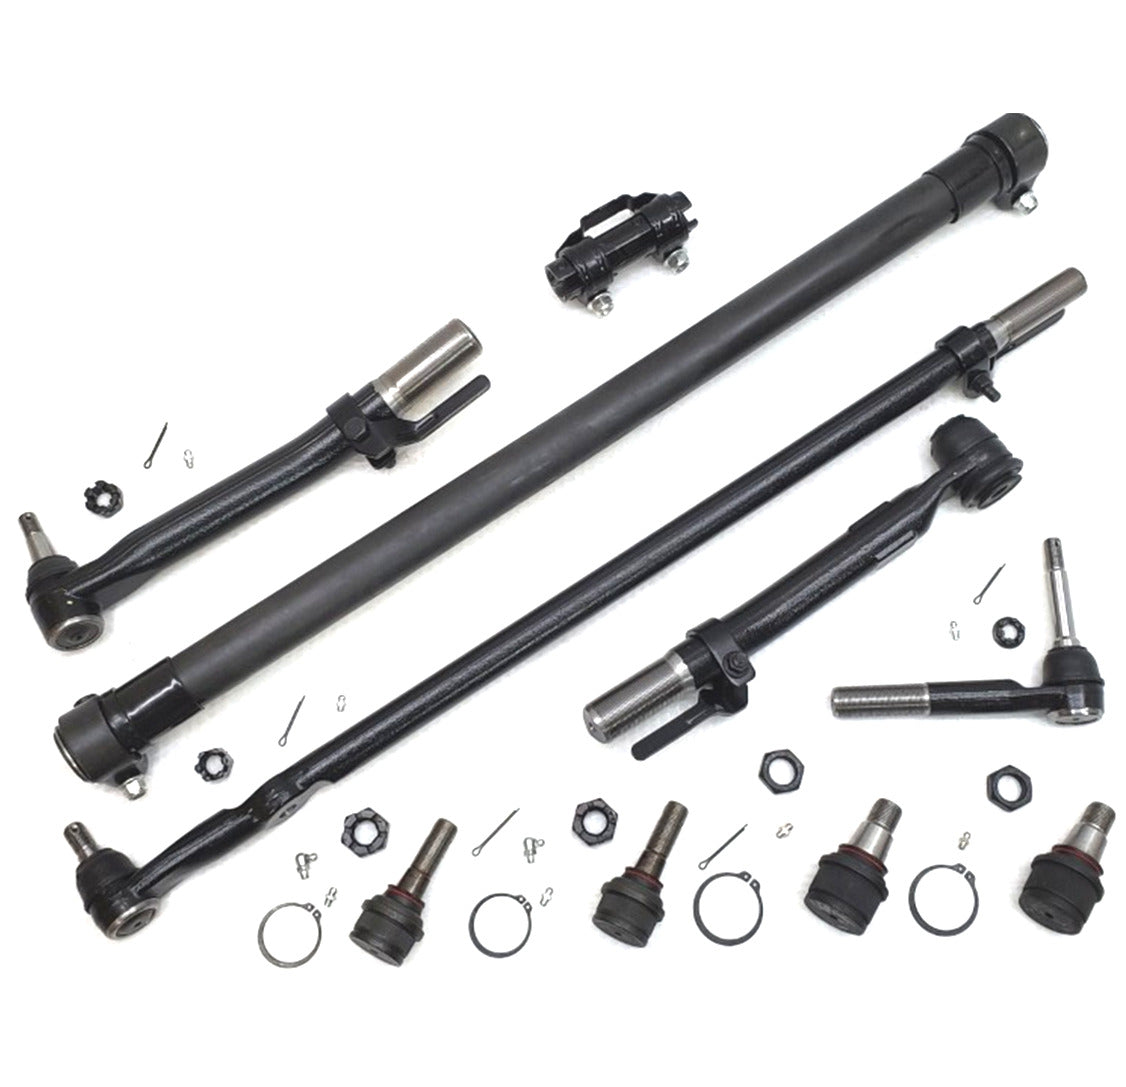 Lifetime Drag Link Tie Rod Ball Joint Steering Kit for 2005-2007 Ford F250, F350 Super Duty 4x4